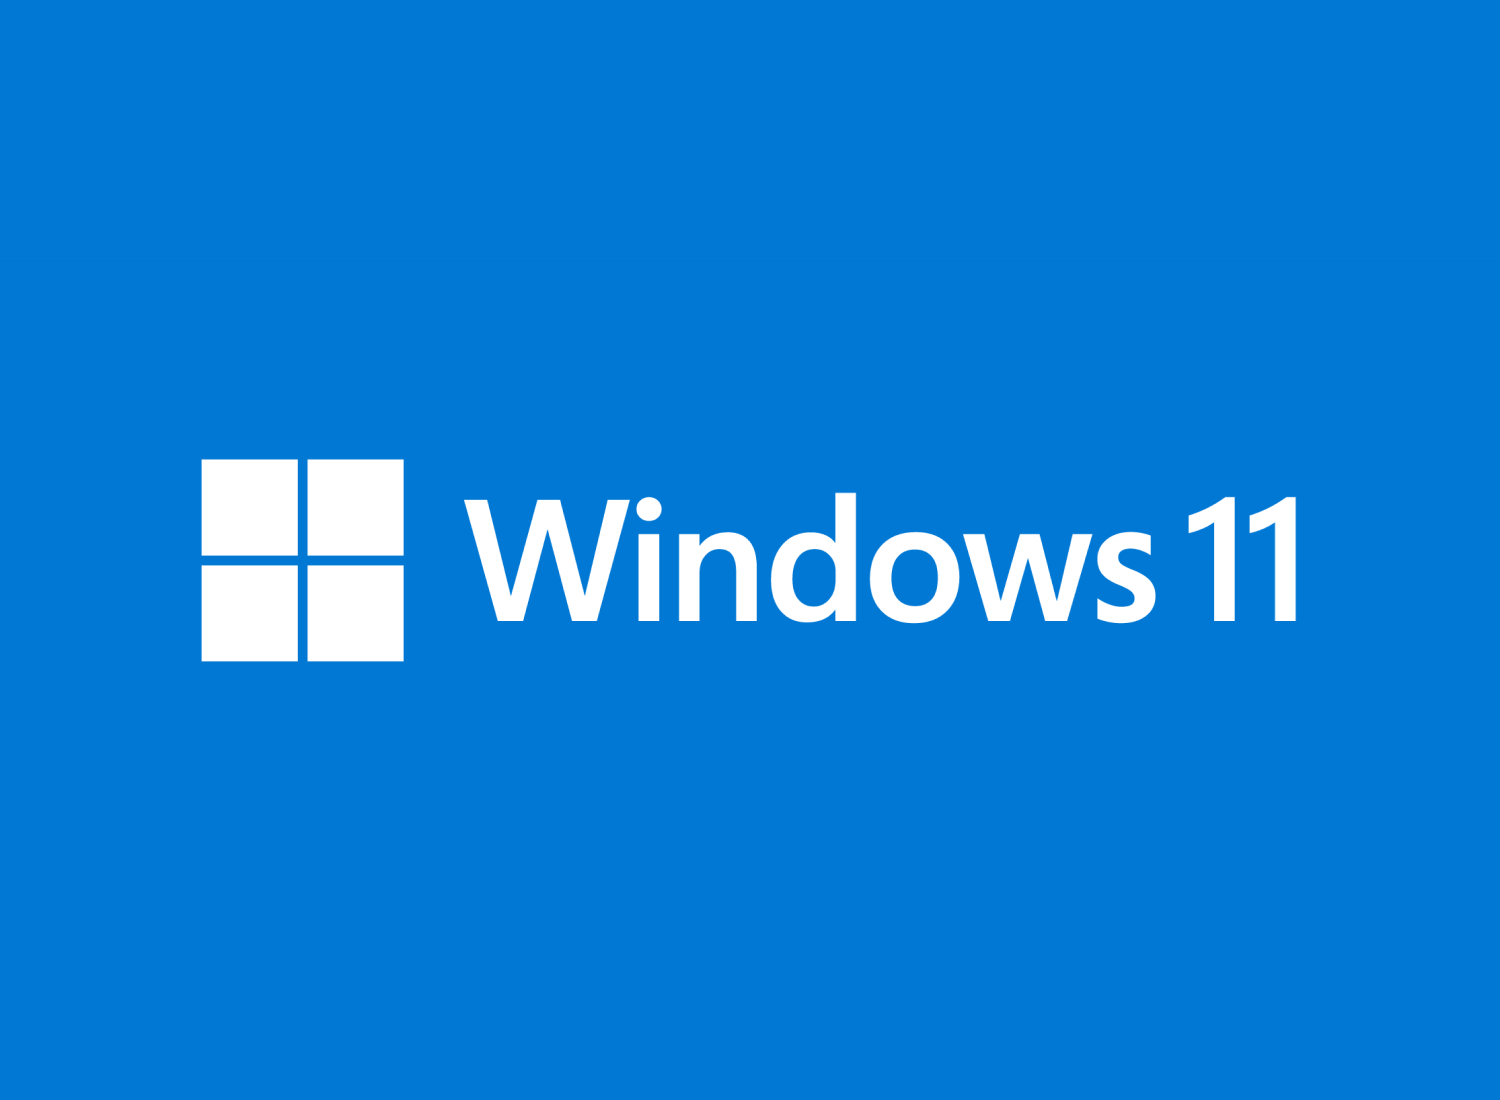 Announcing Windows 10 Insider Preview Build 19044.1202 (21H2)